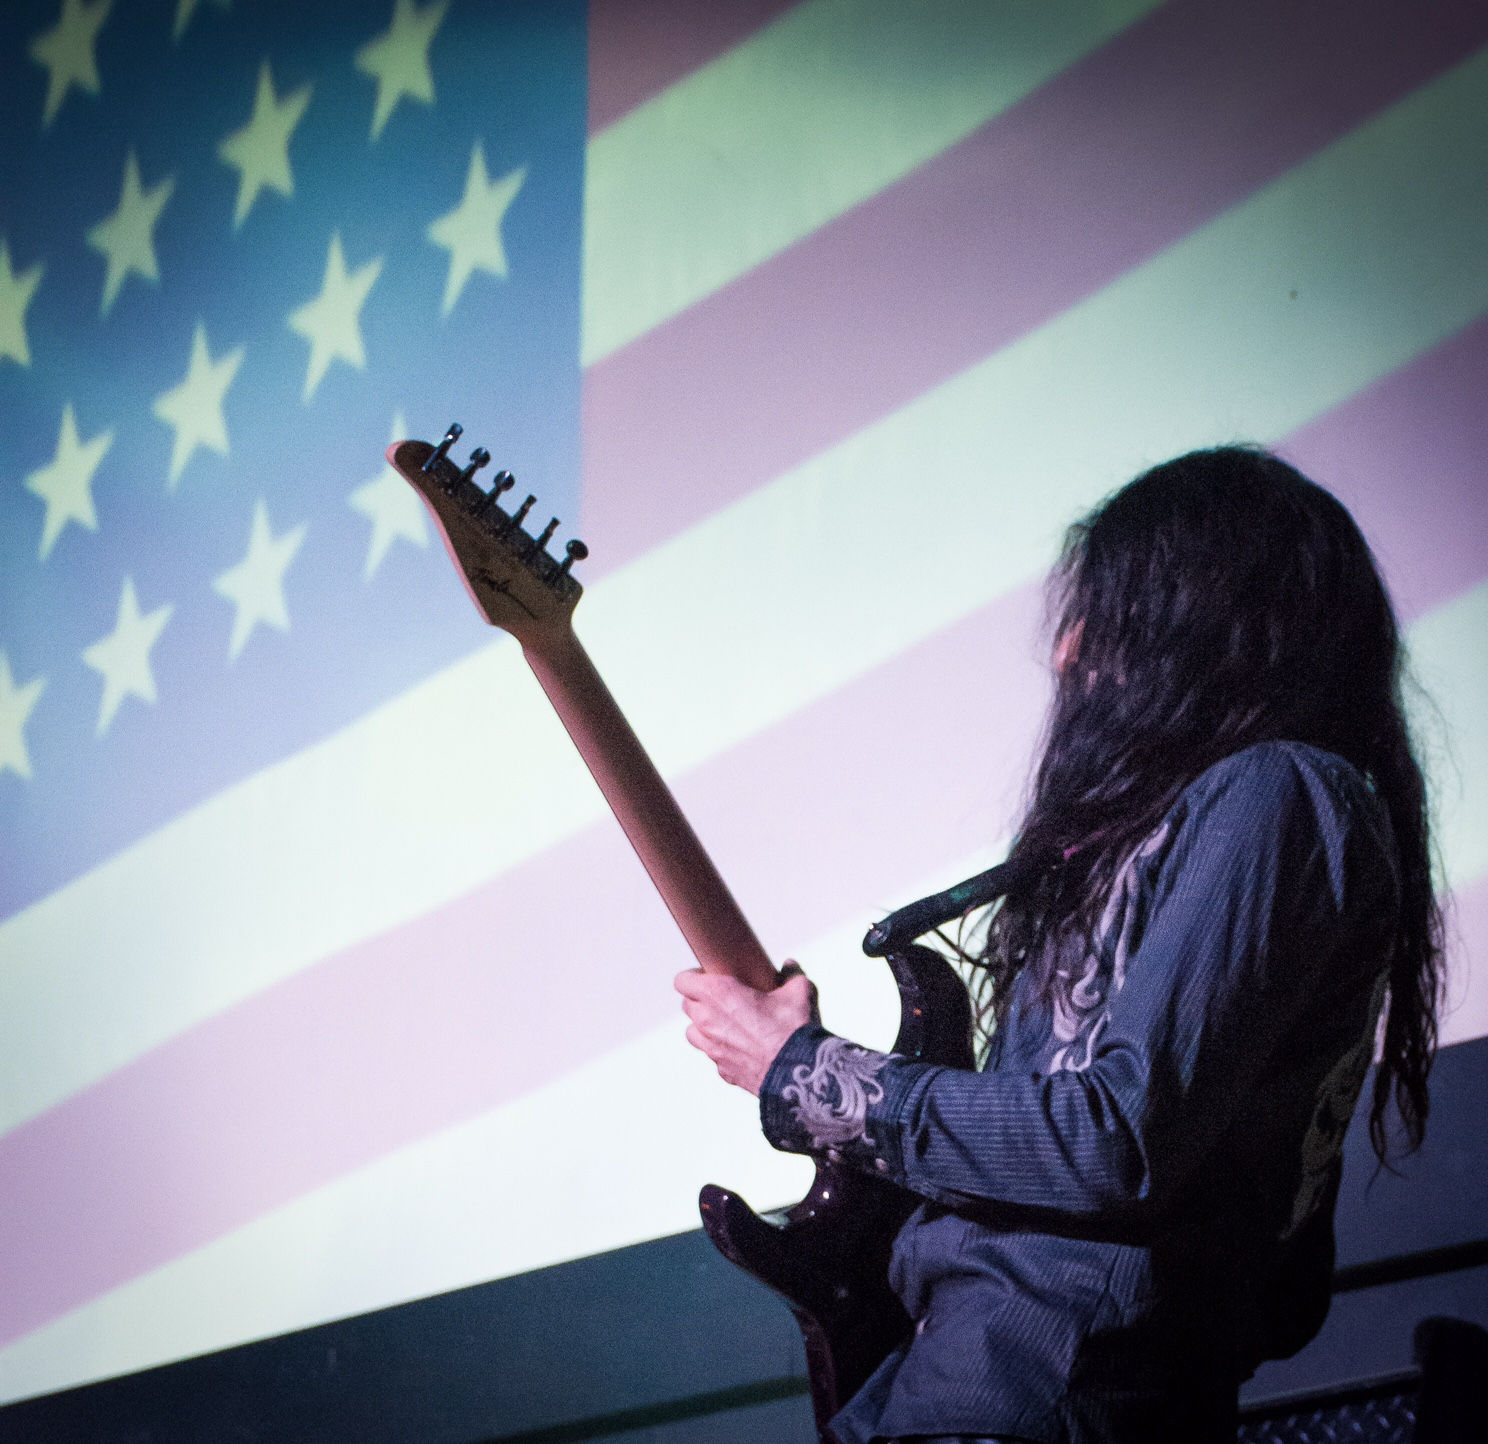 Mike Campese, In front of the American Flag, Madison Theater 2016 - Taken by Jeffrey Sousa